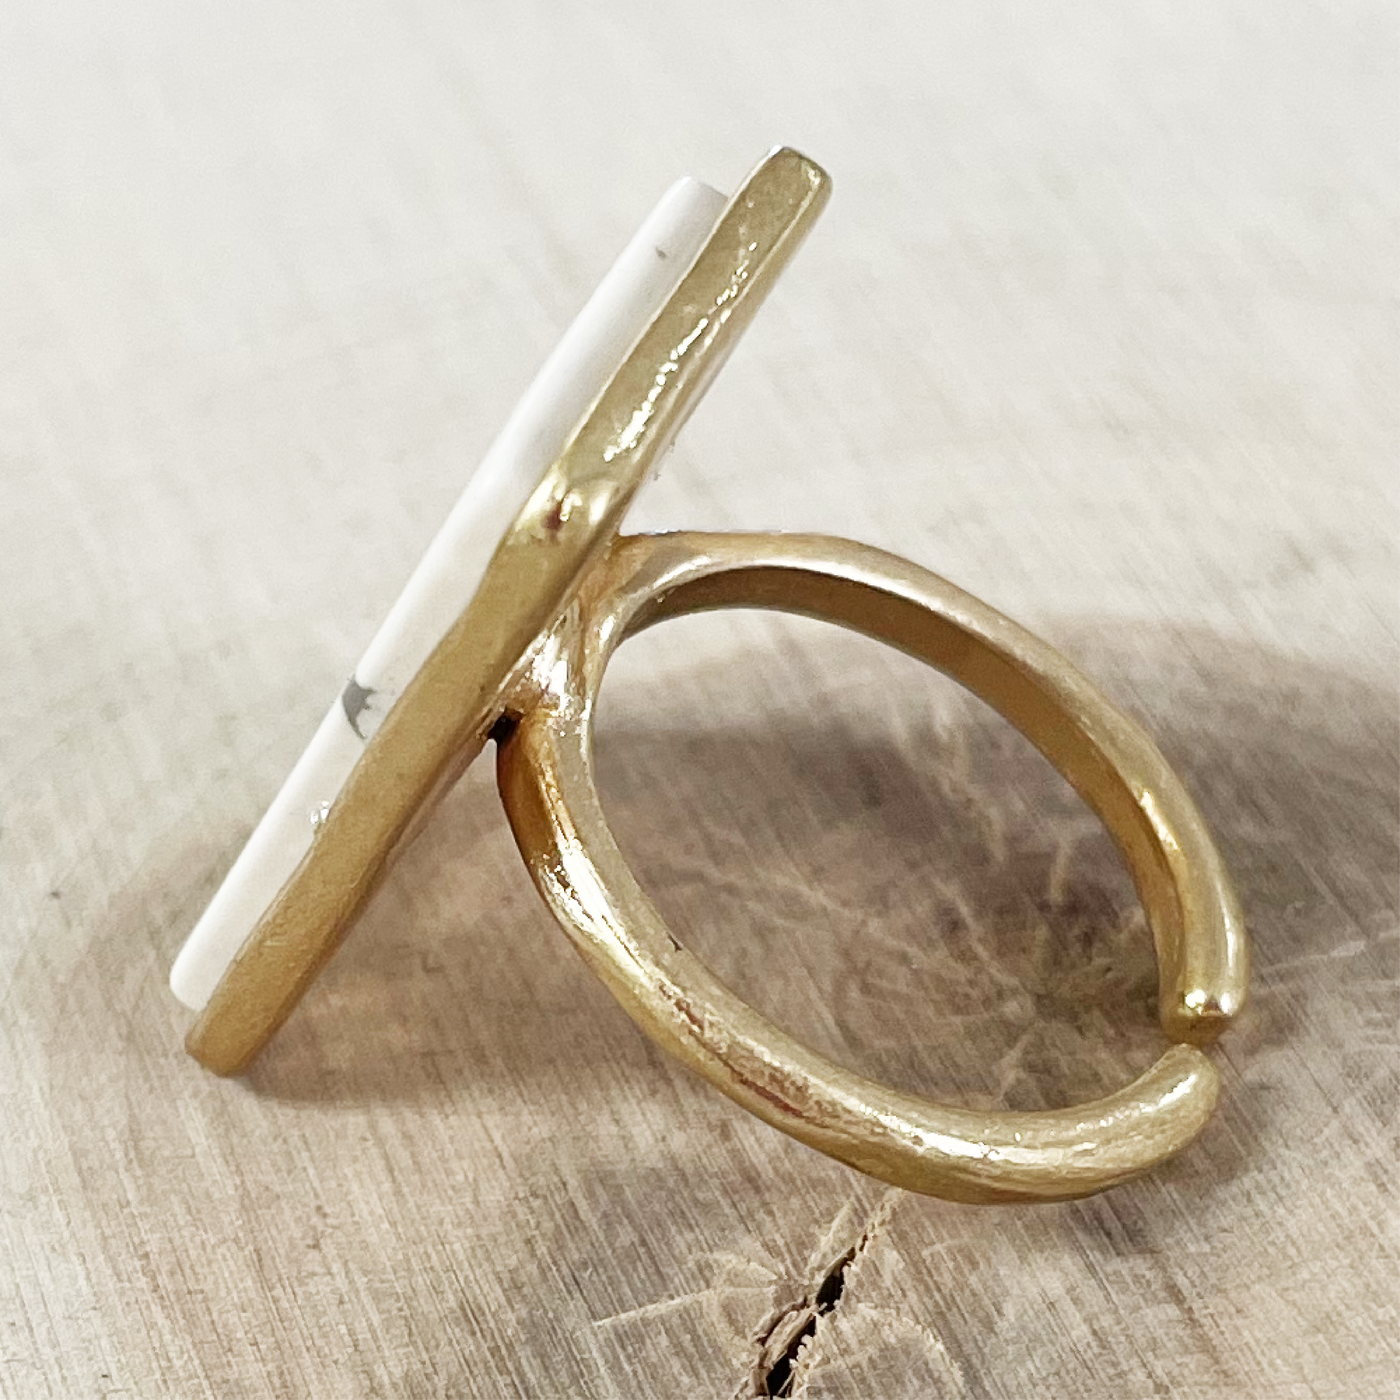 Gold & Howlite Rectangle Stone Adjustable Ring